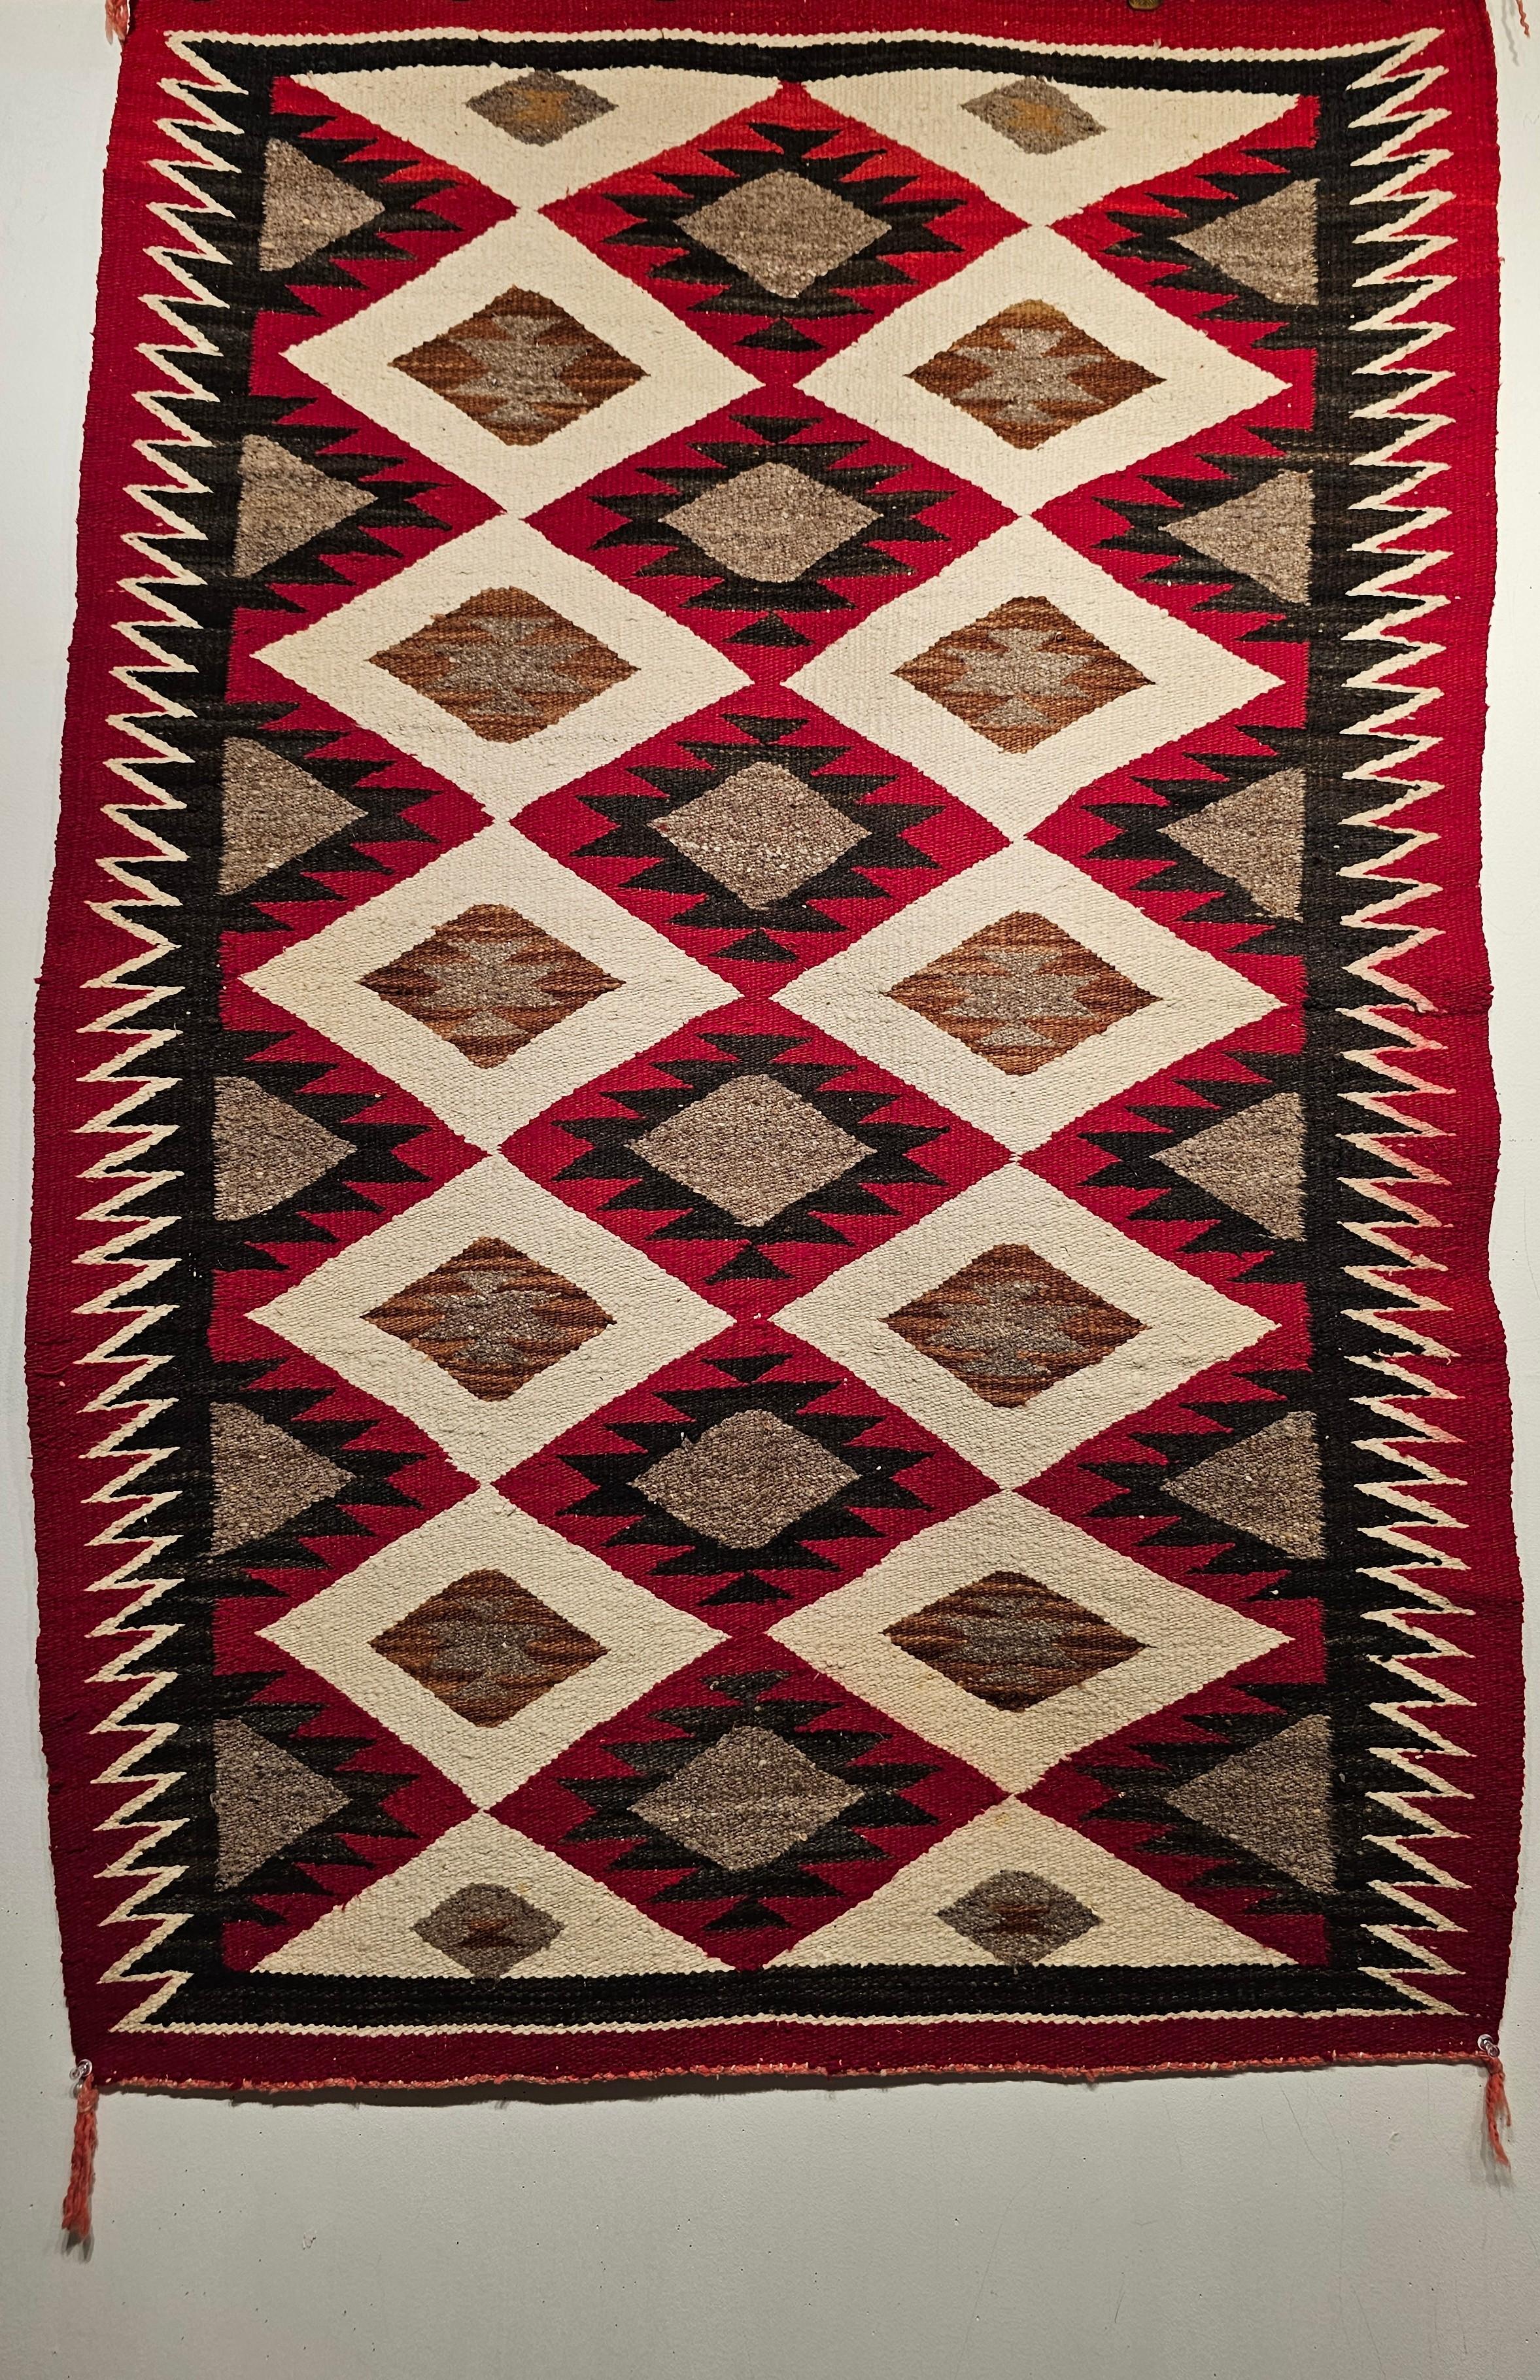 Native American Navajo Rug in Eye Dazzler Pattern in ivory, burgundy, brown, gray and black colors from the SW United States from the early 1900s.  This Navajo rug is in a geometric design consisting of three rows of different size diamond forms in